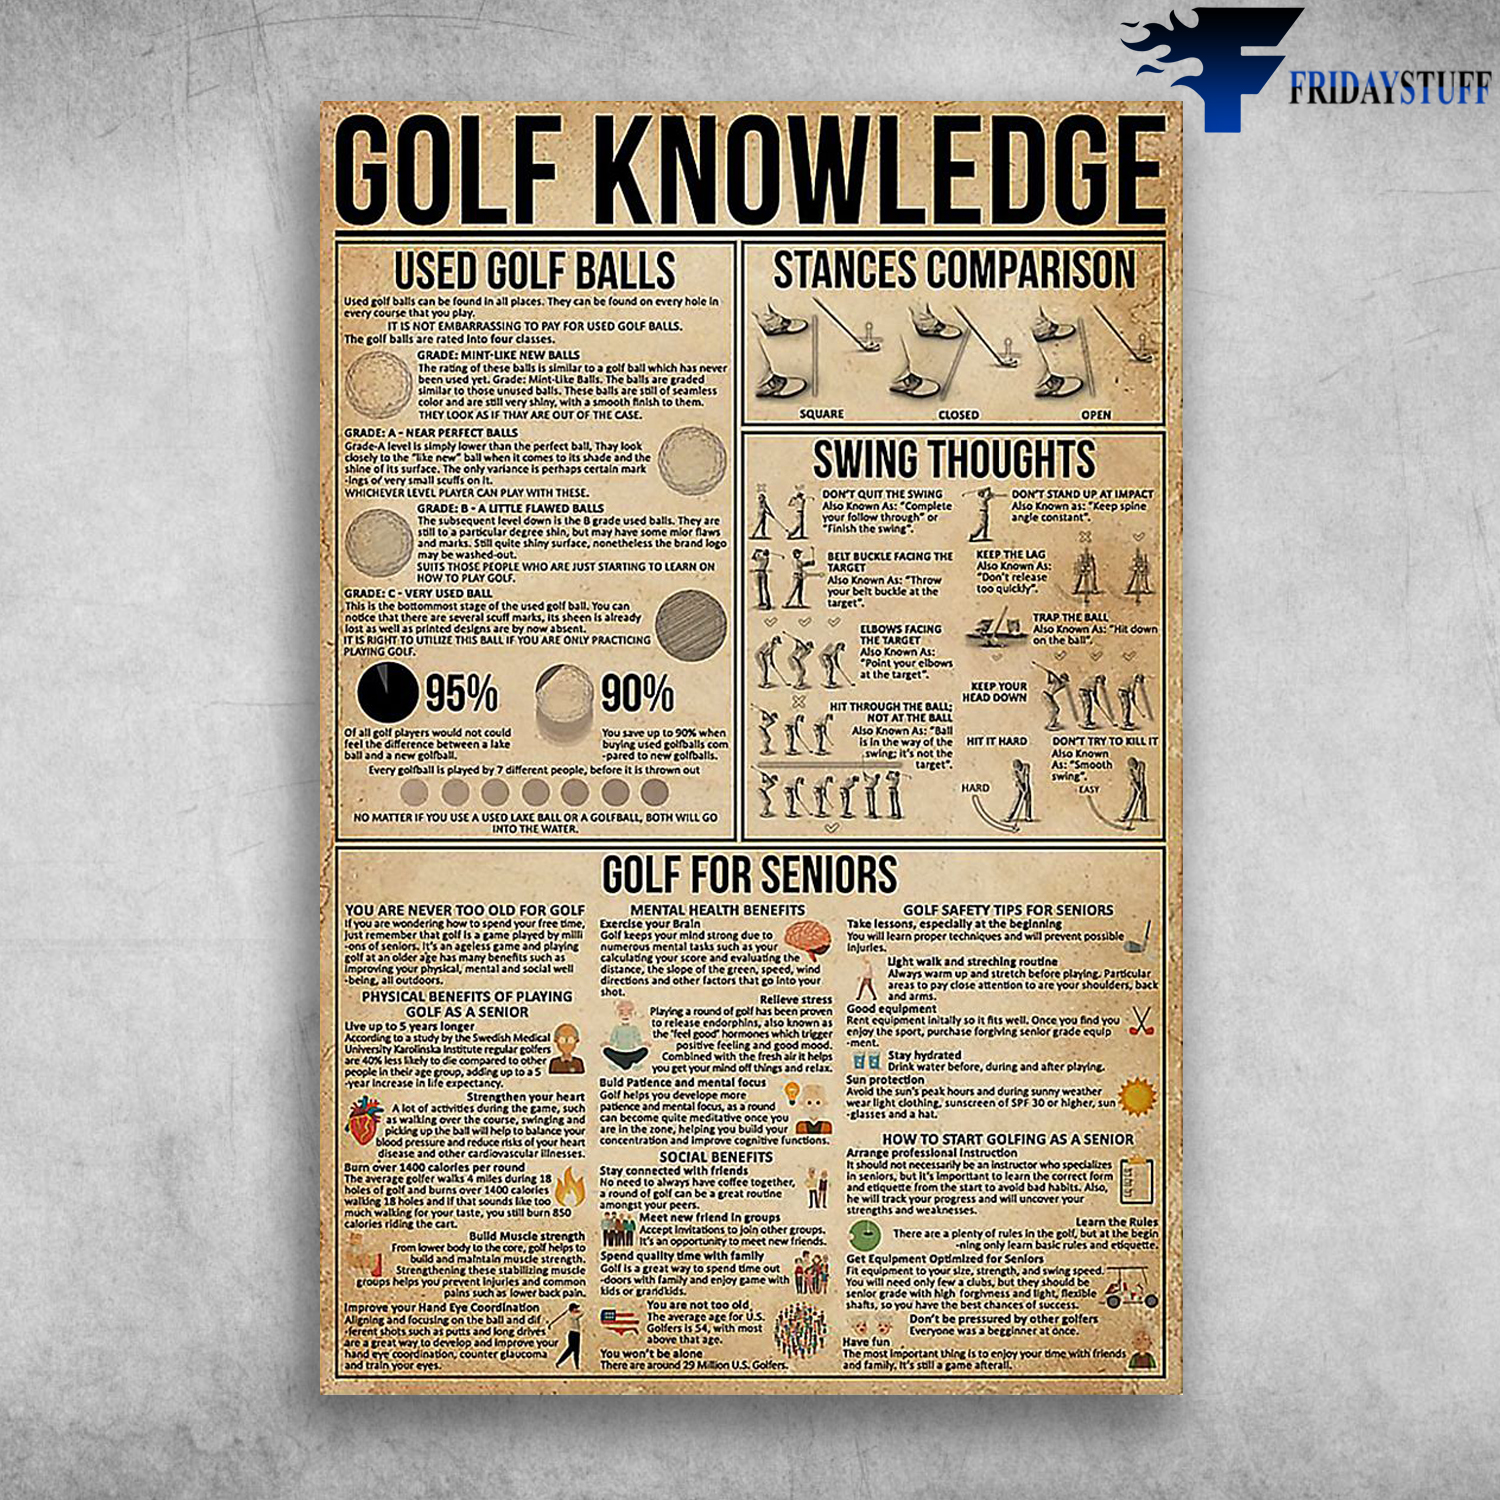 Golf Knowledge Used Golf Balls Stances Comparison Swing Thoughts